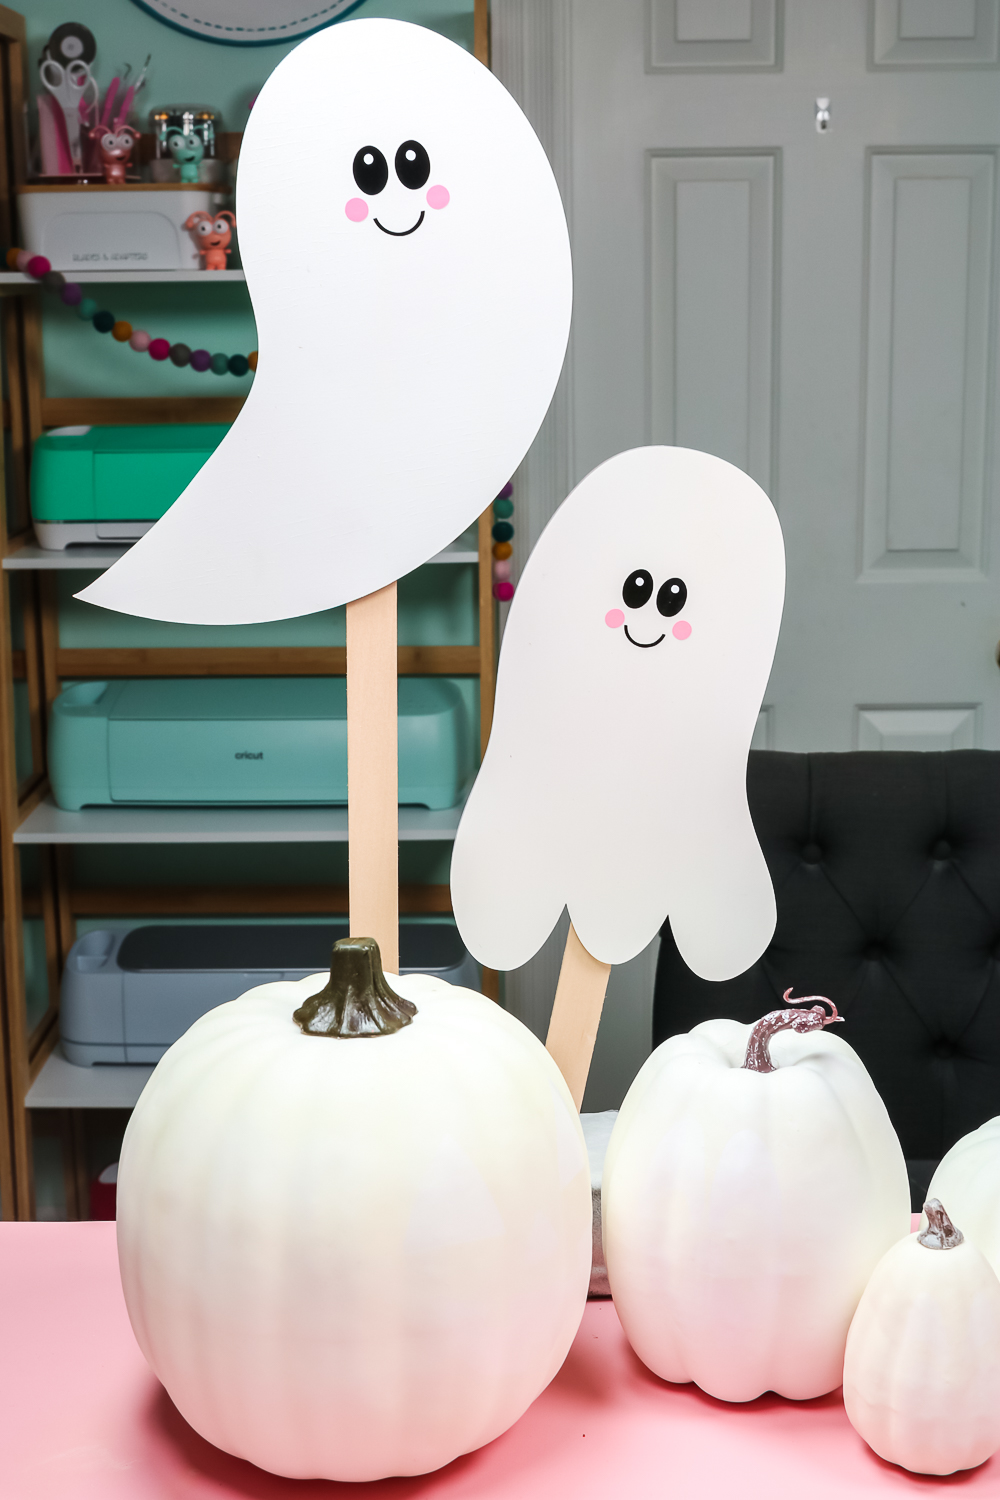 Glow-in-the-Dark Halloween Projects